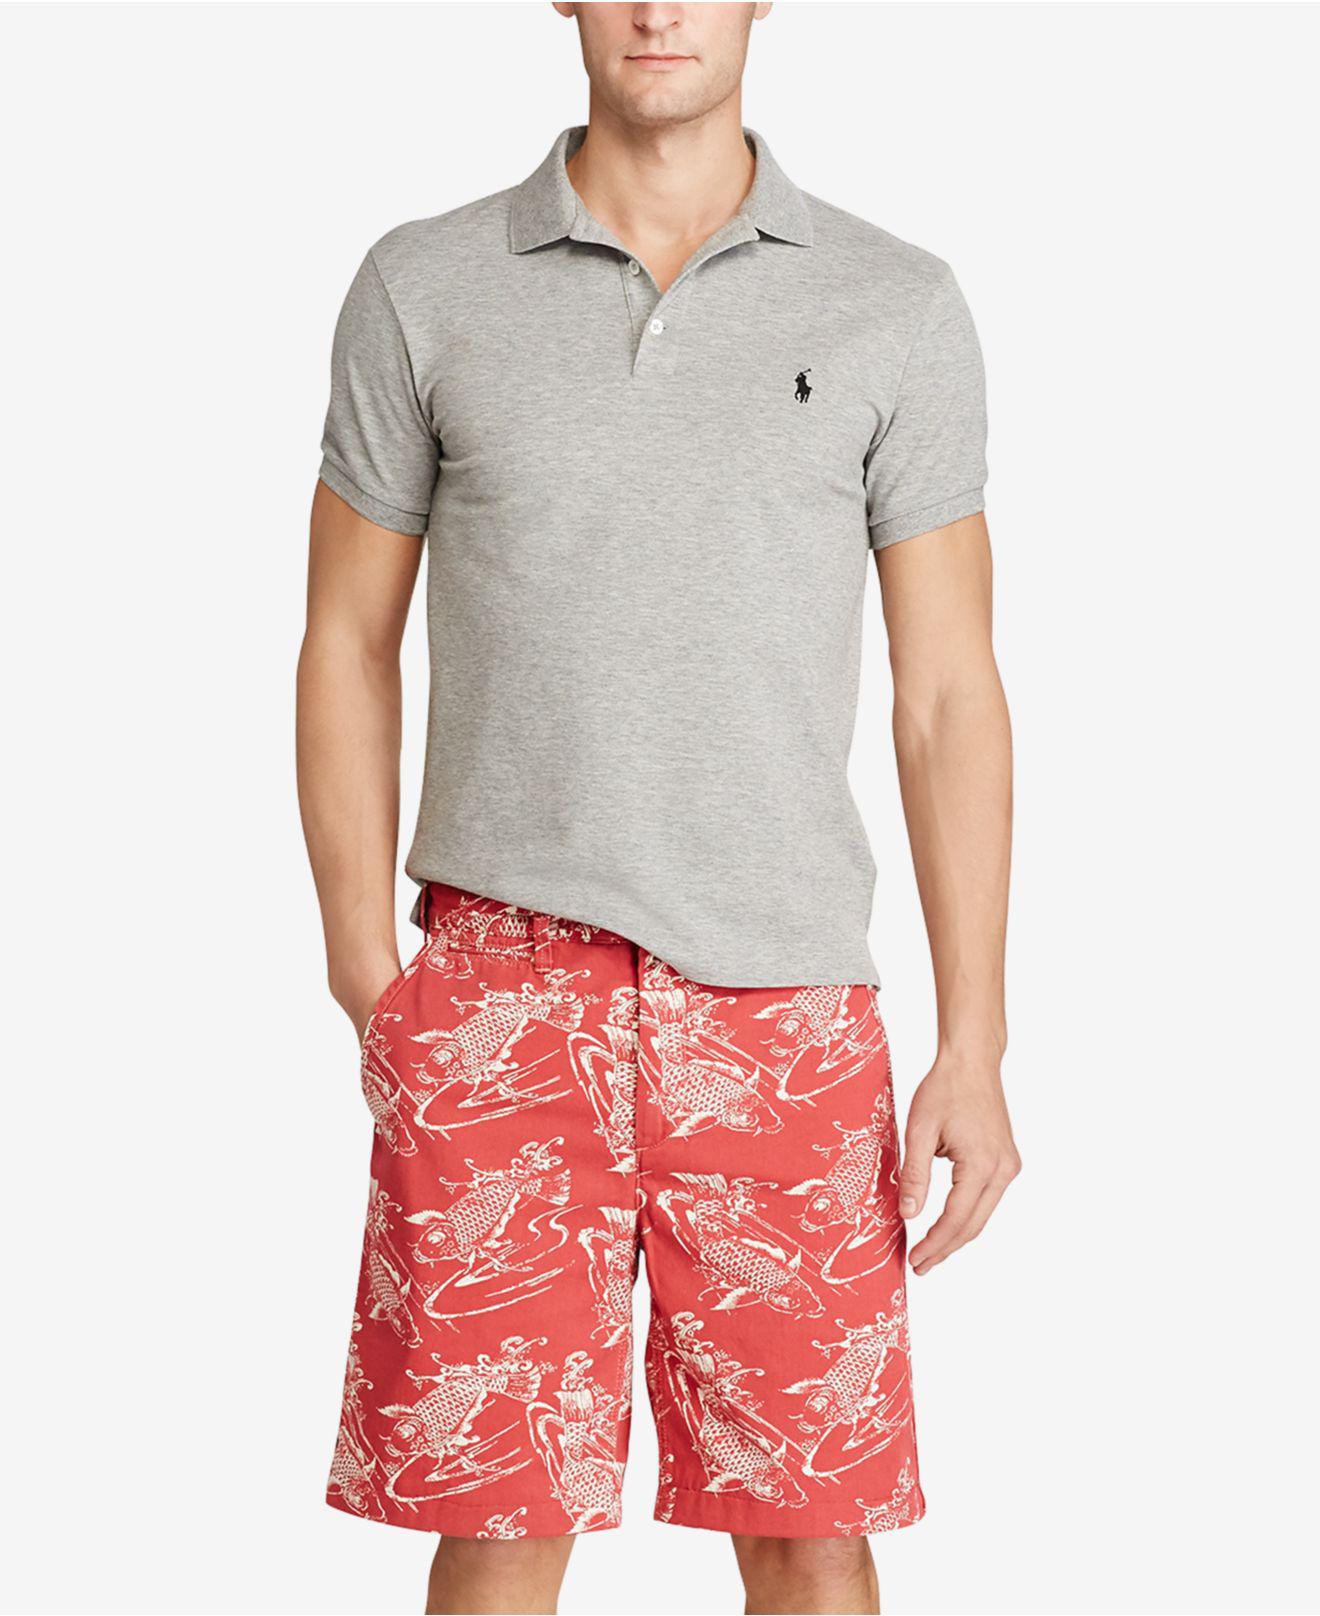 Lyst - Polo Ralph Lauren Relaxed Fit Cotton Chino Shorts ...